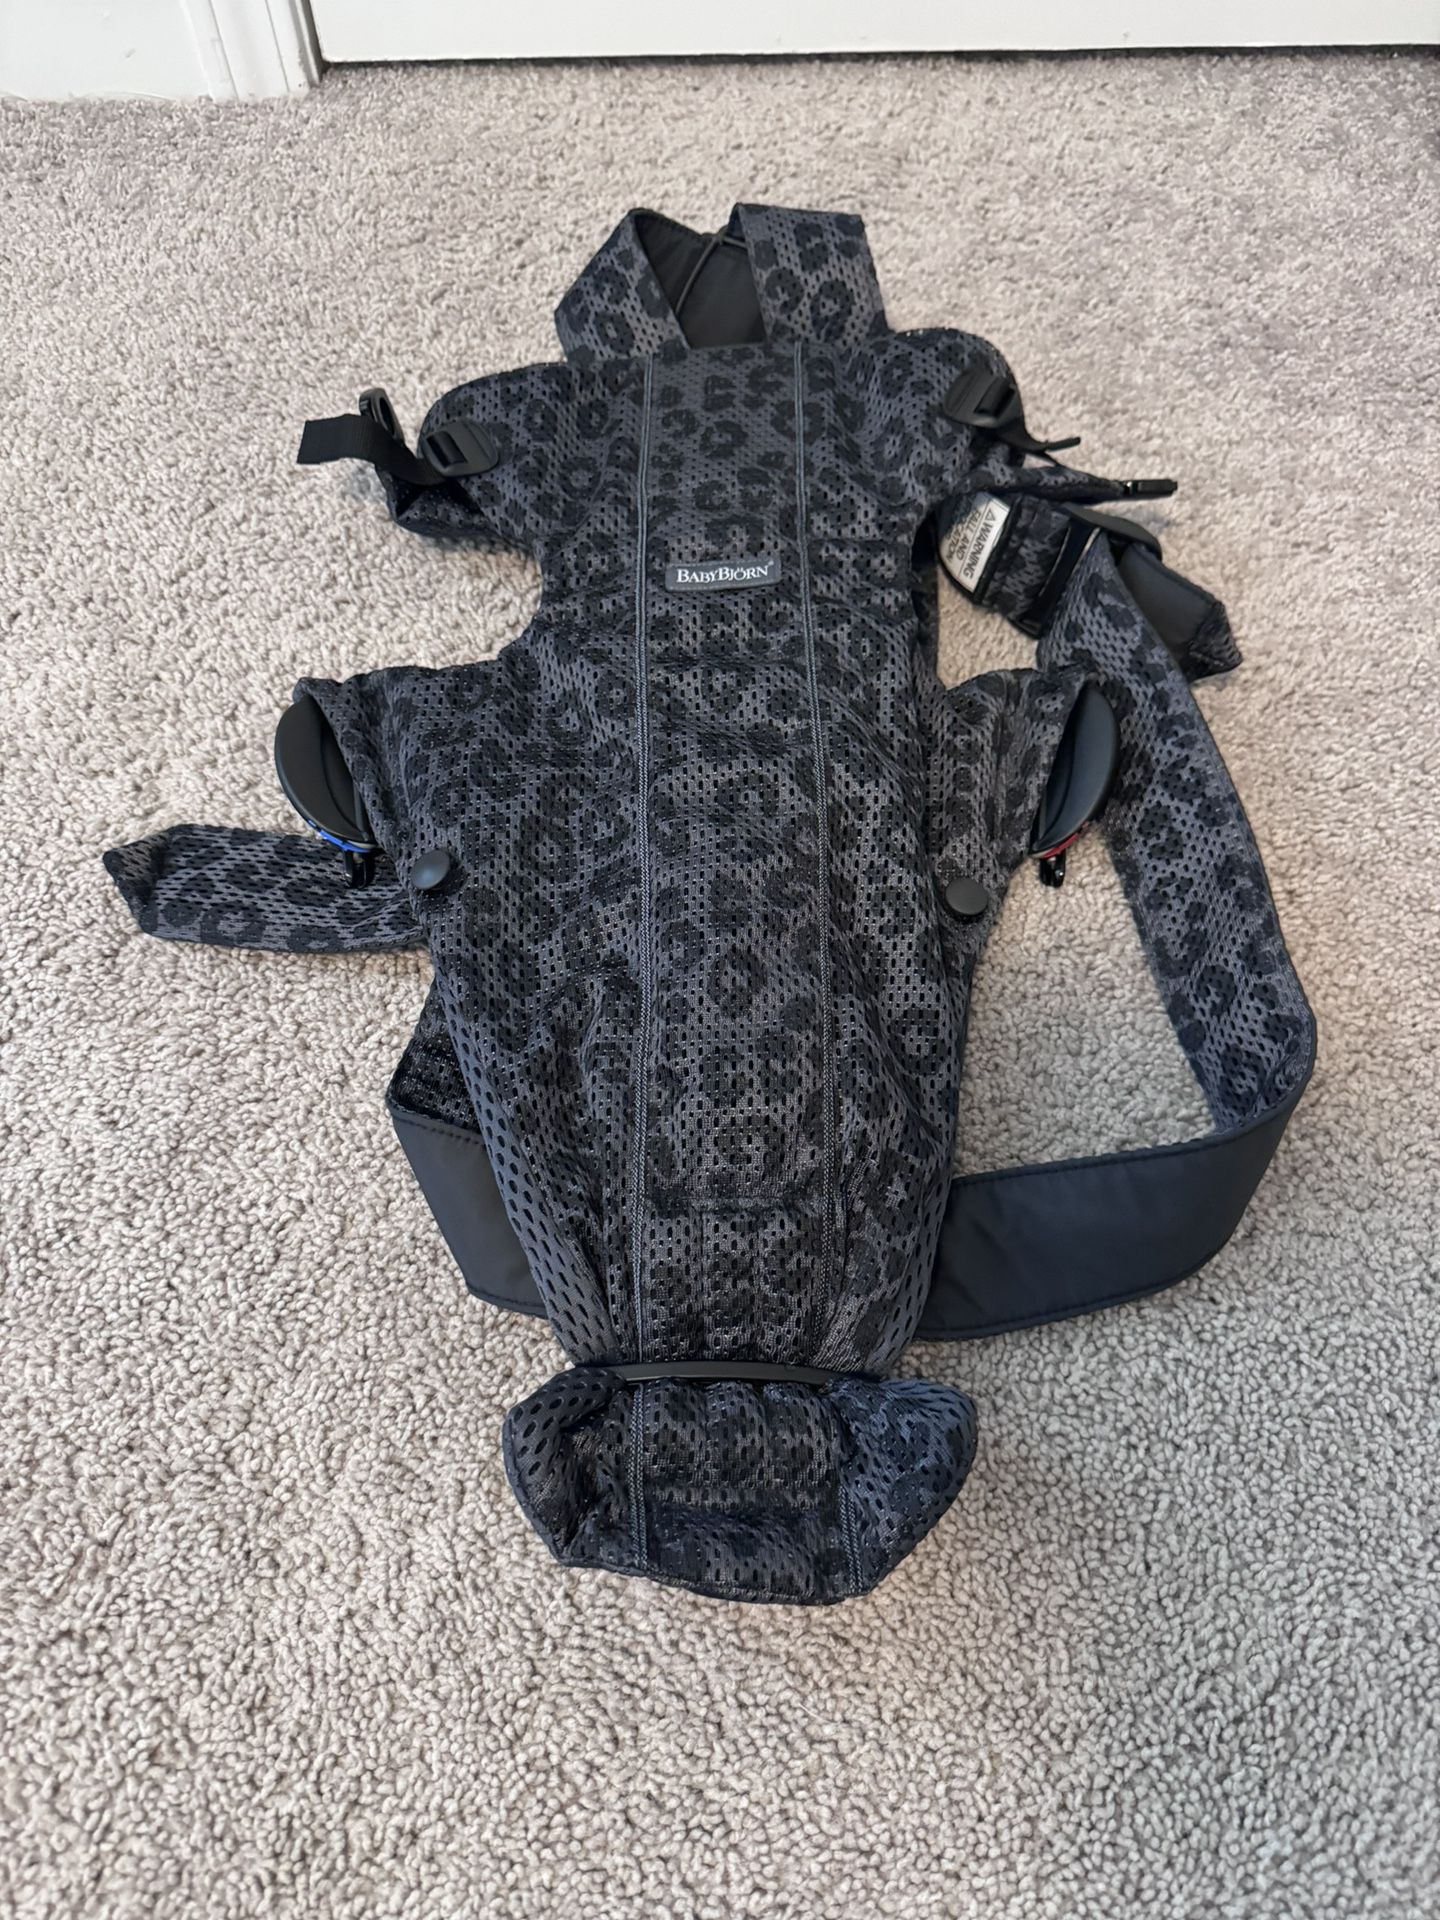 Baby Bjorn Baby Carrier Mini, 3D mesh, Black and Grey Leopard